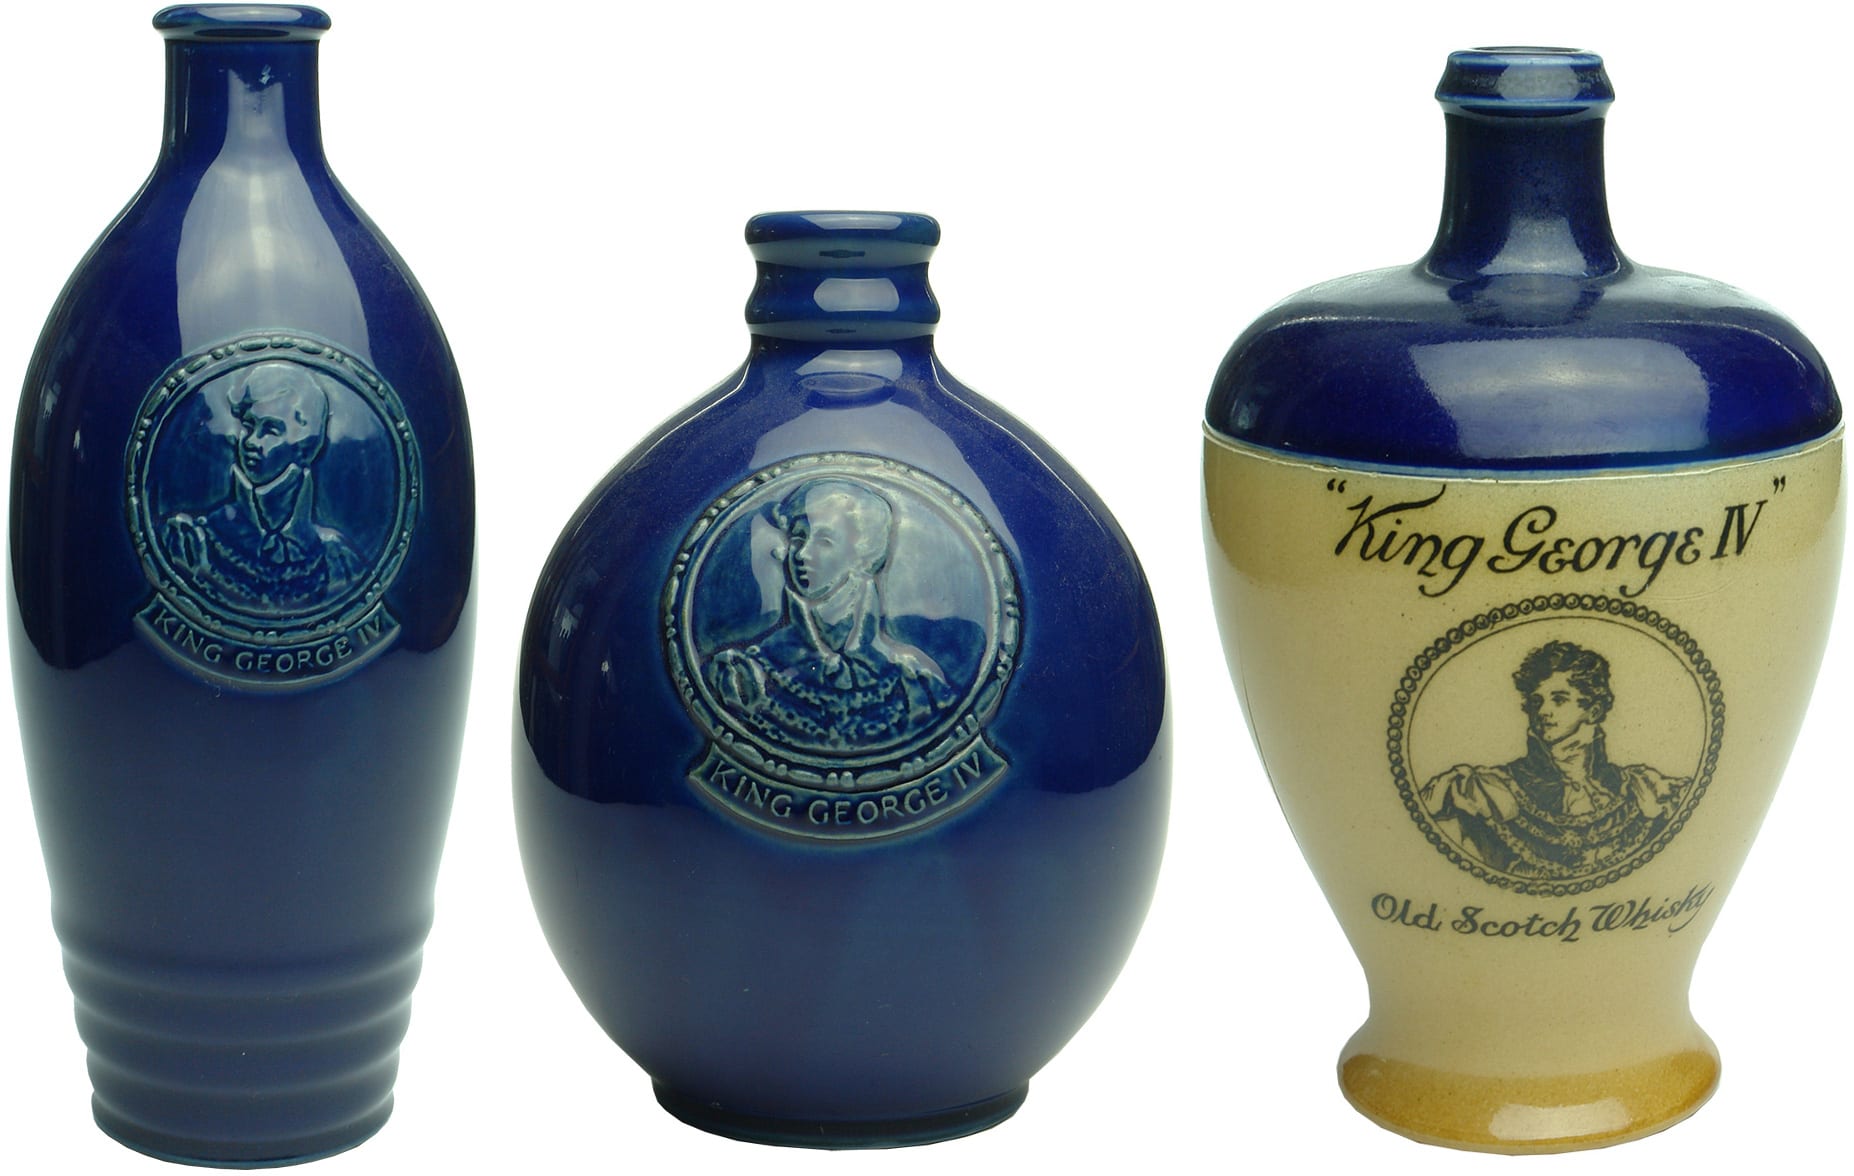 King George IV Antique Whisky Decanters